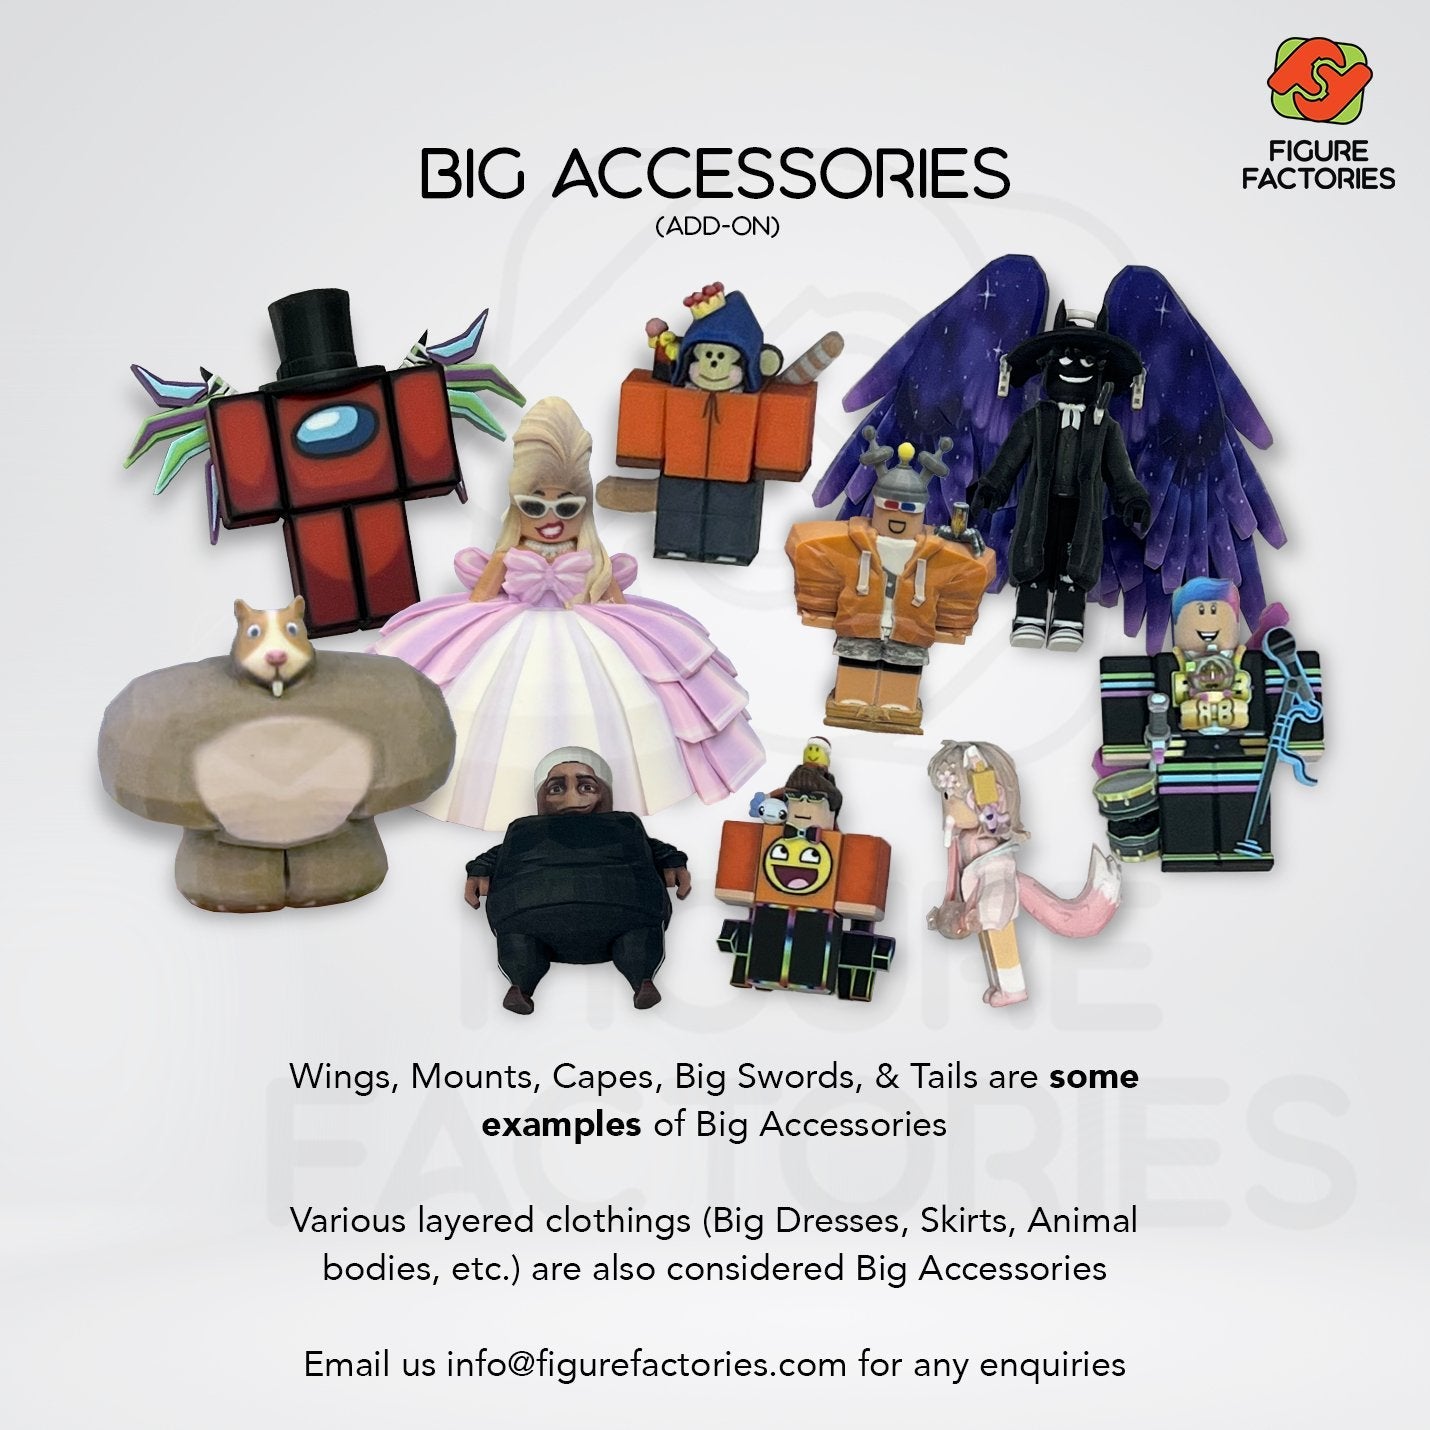 Custom Roblox toy figure and figurines sample add-on big accessories